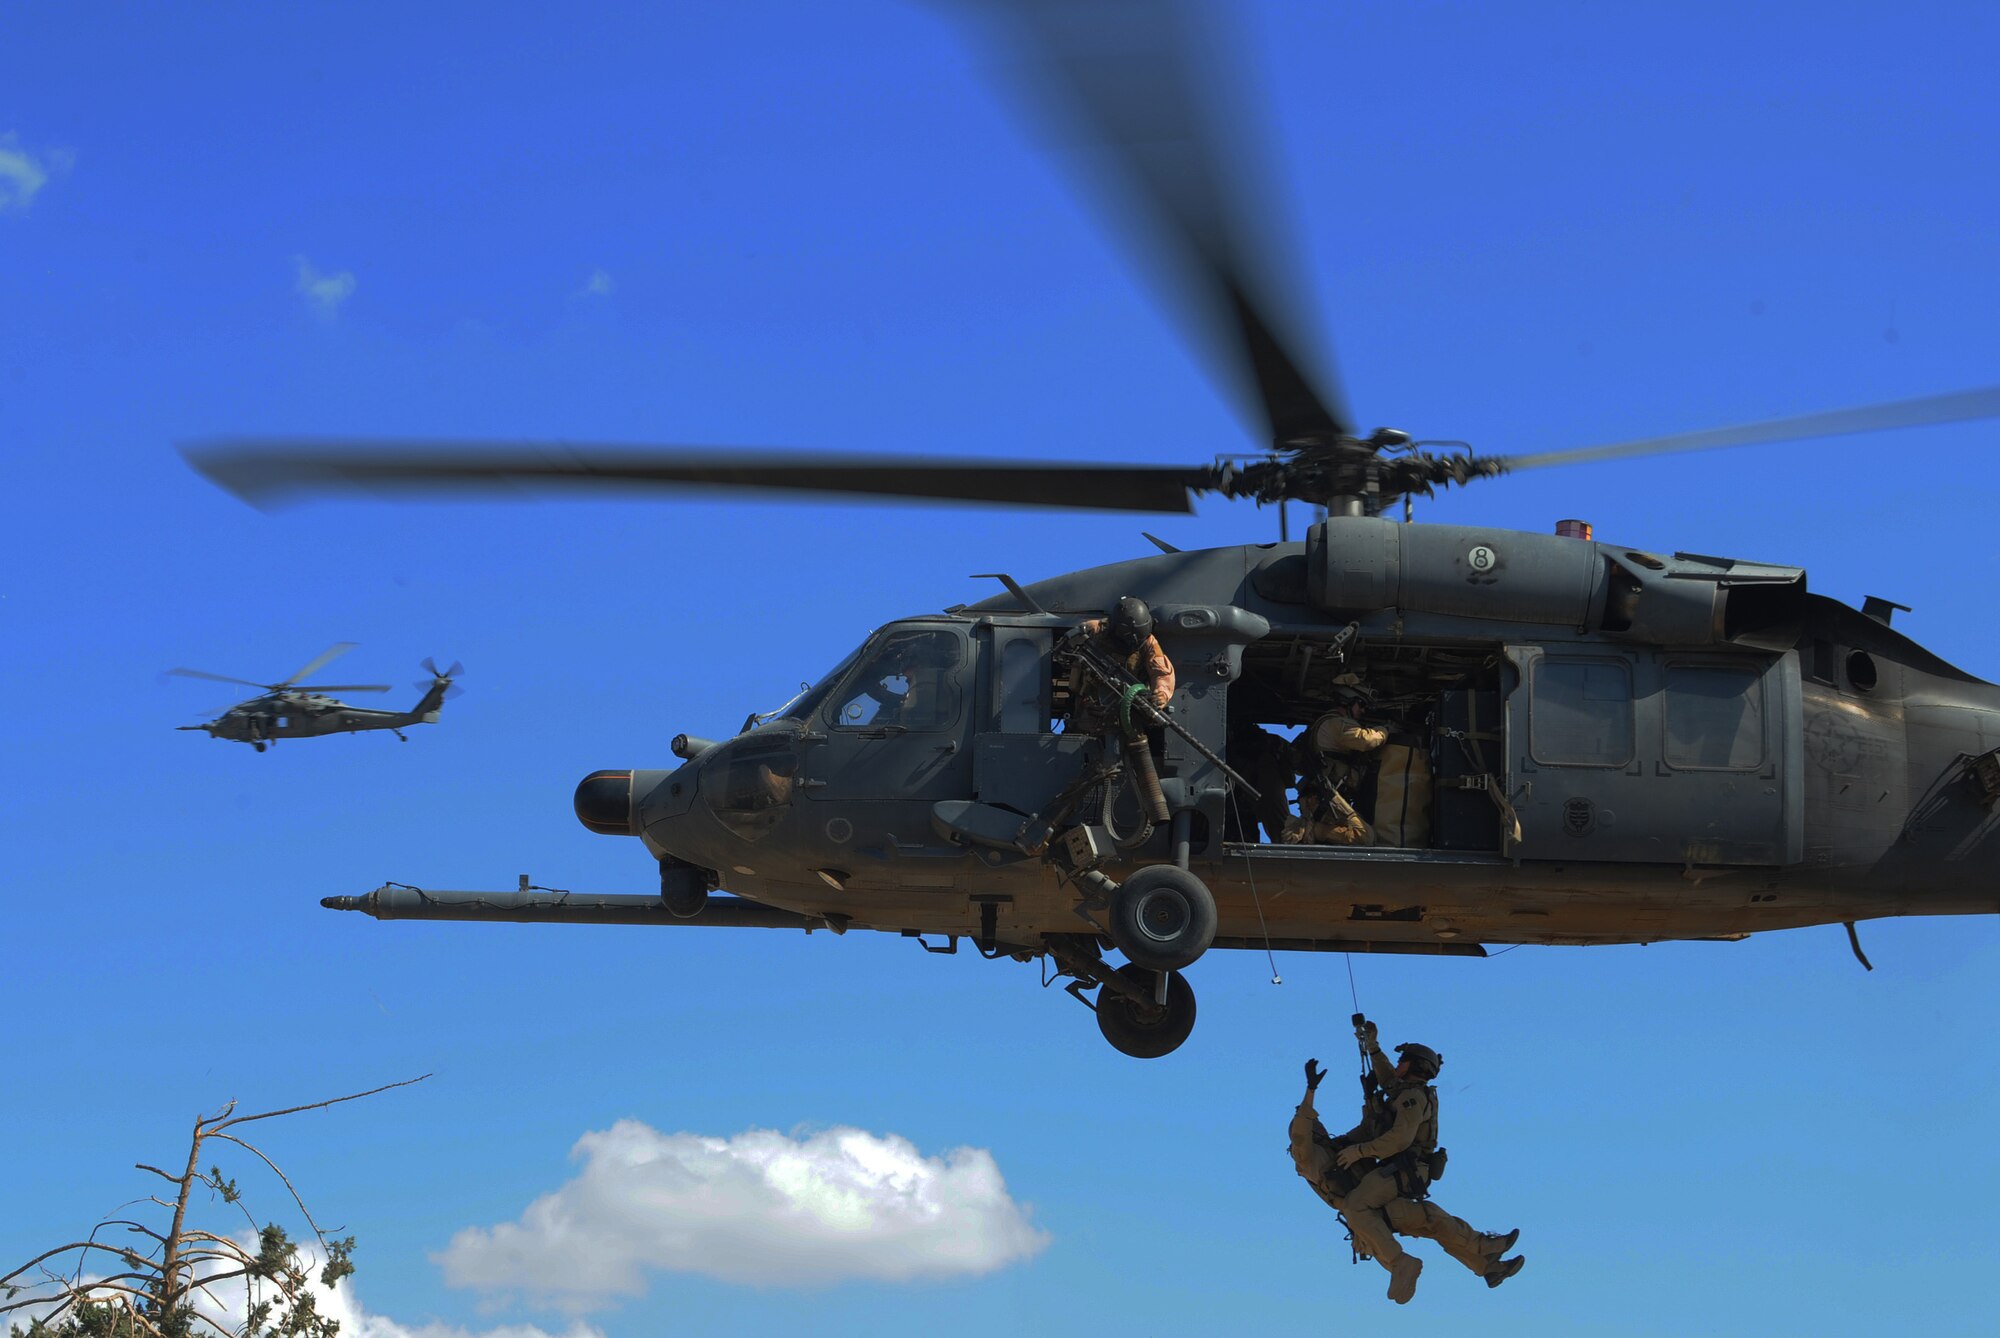 U.S. Air Force Pararescuemen from the 64th Expeditionary Rescue Squadron, Joint Base Balad, Iraq, are hoisted into an HH-60 Pavehawk helicopter outside of Baghdad, Iraq, during a proficiency exercise April 10, 2009, in support of Operation Iraqi Freedom.  (U.S. Air Force photo by Staff Sgt. James L. Harper Jr.)